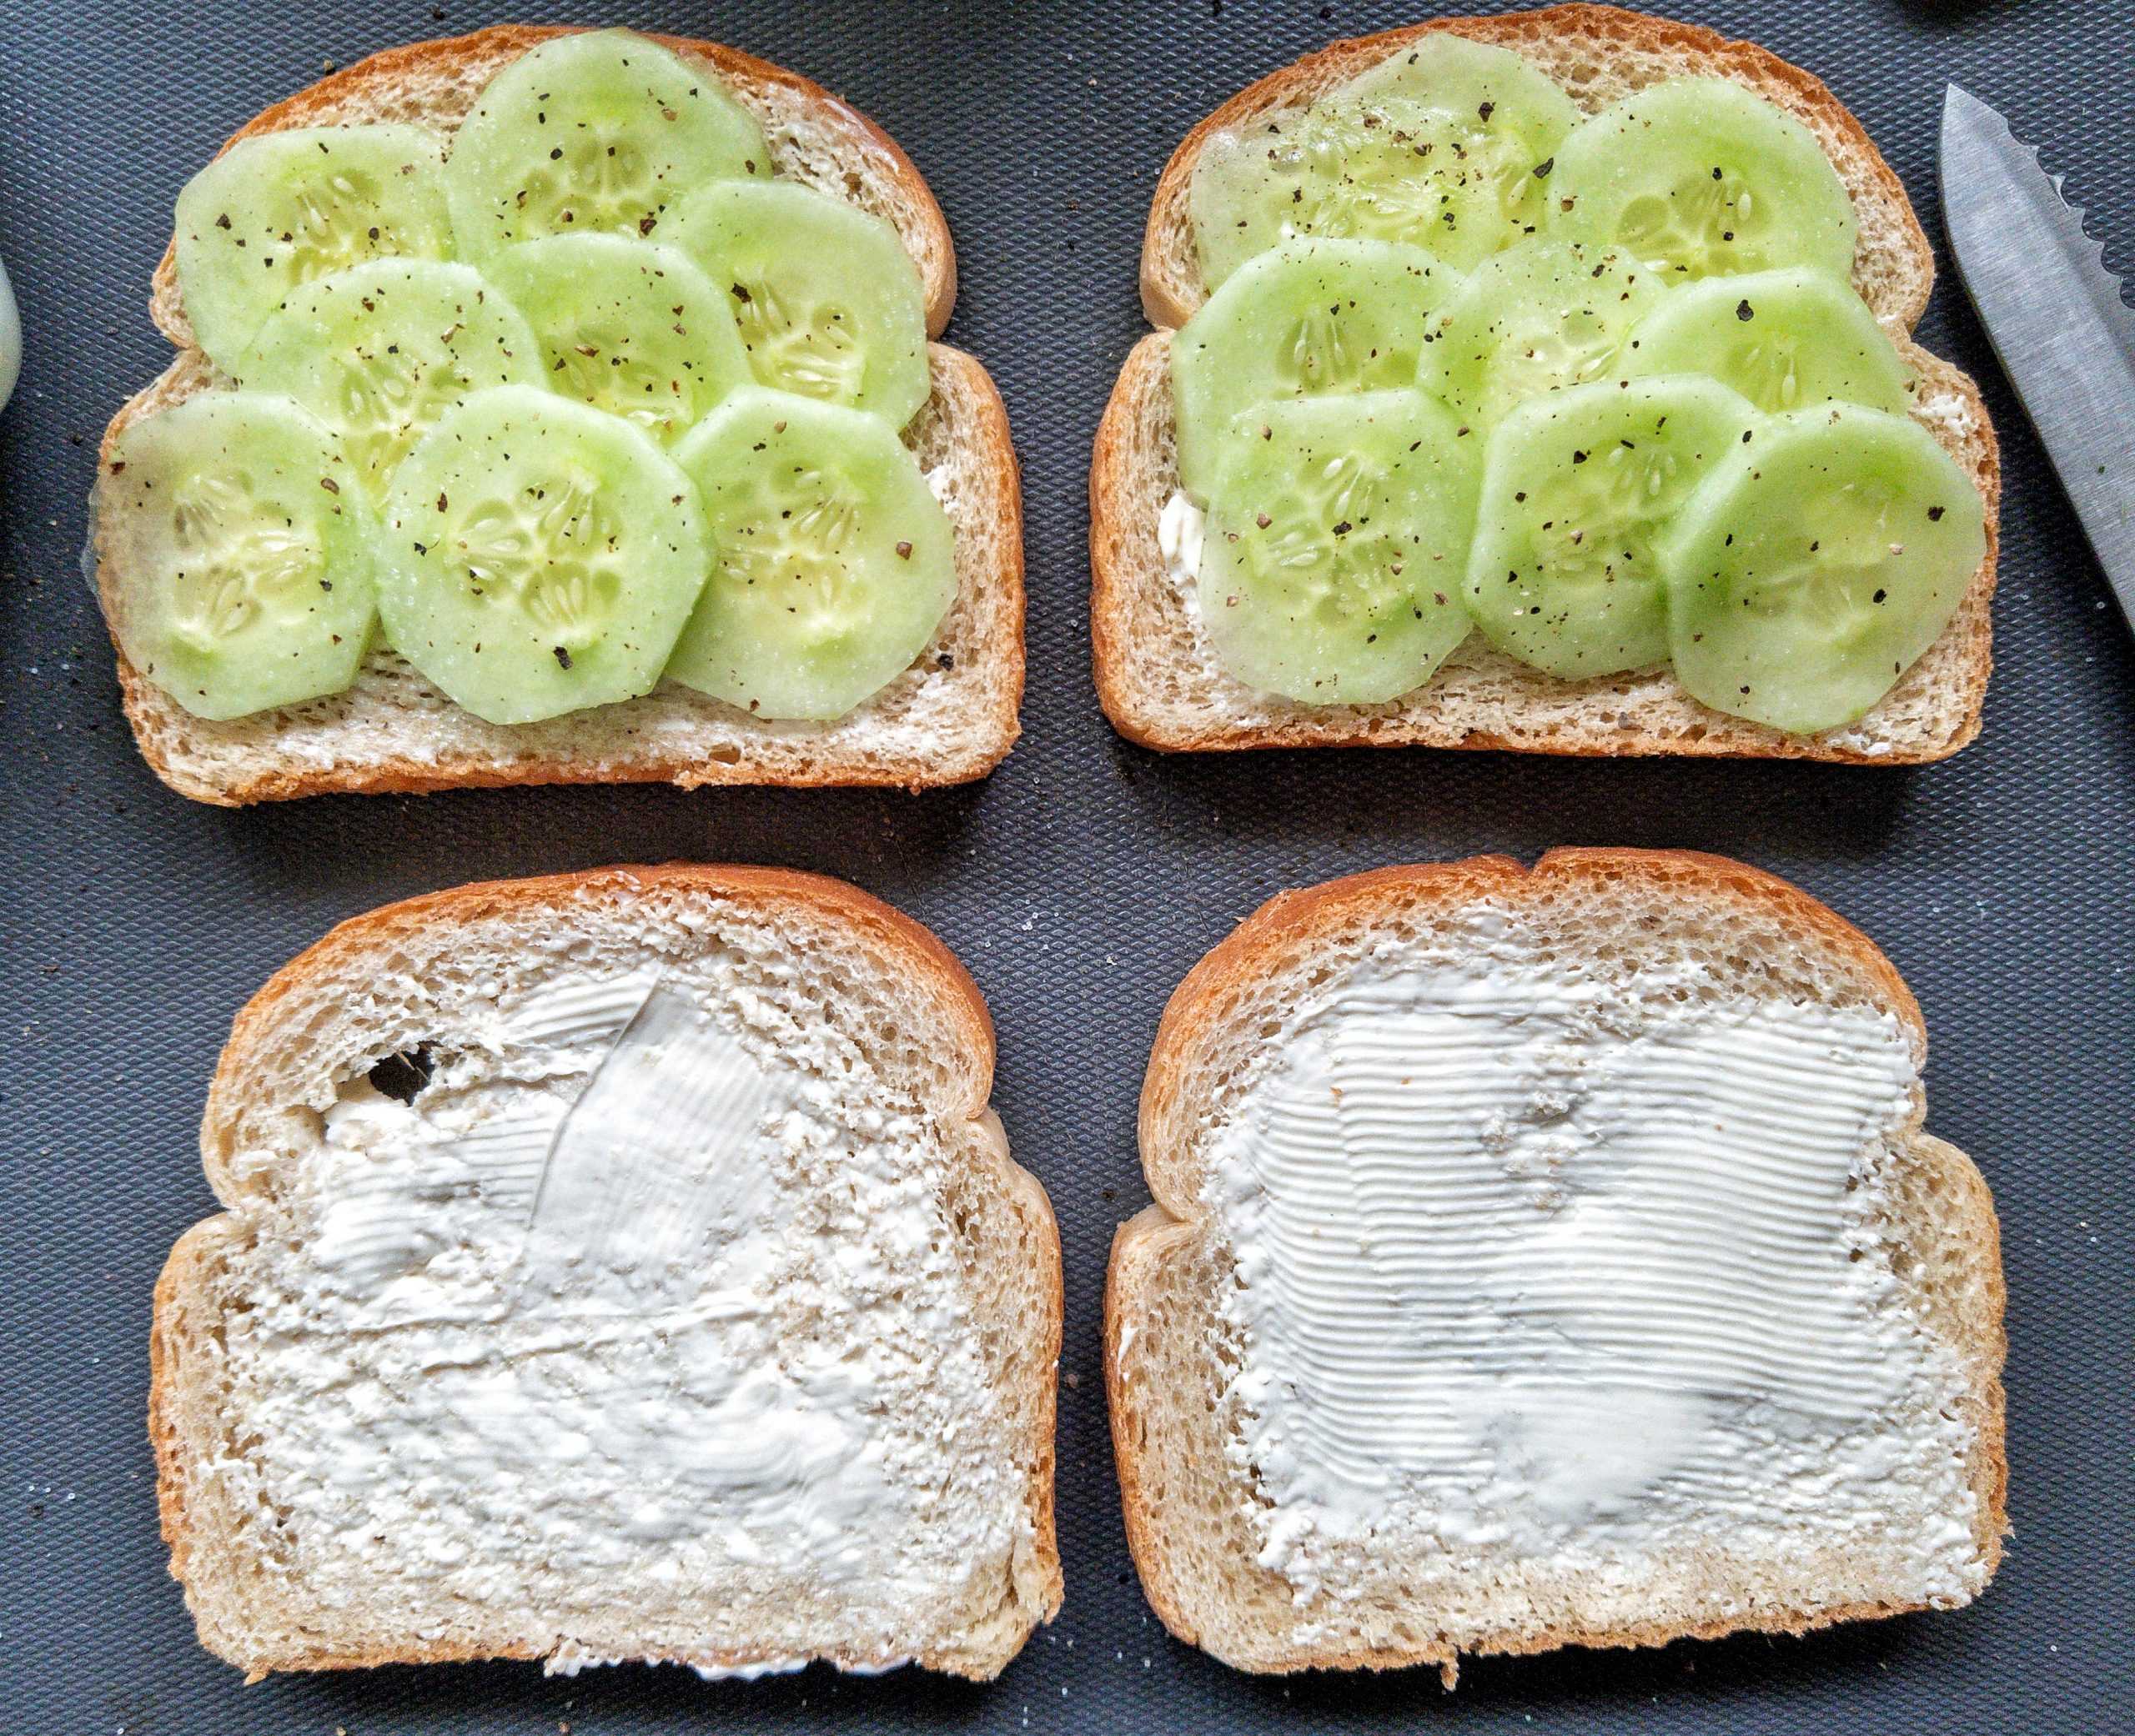 Four slices of buttered, white bread. Two slices with sliced cucumber, salt, and ground black pepper 